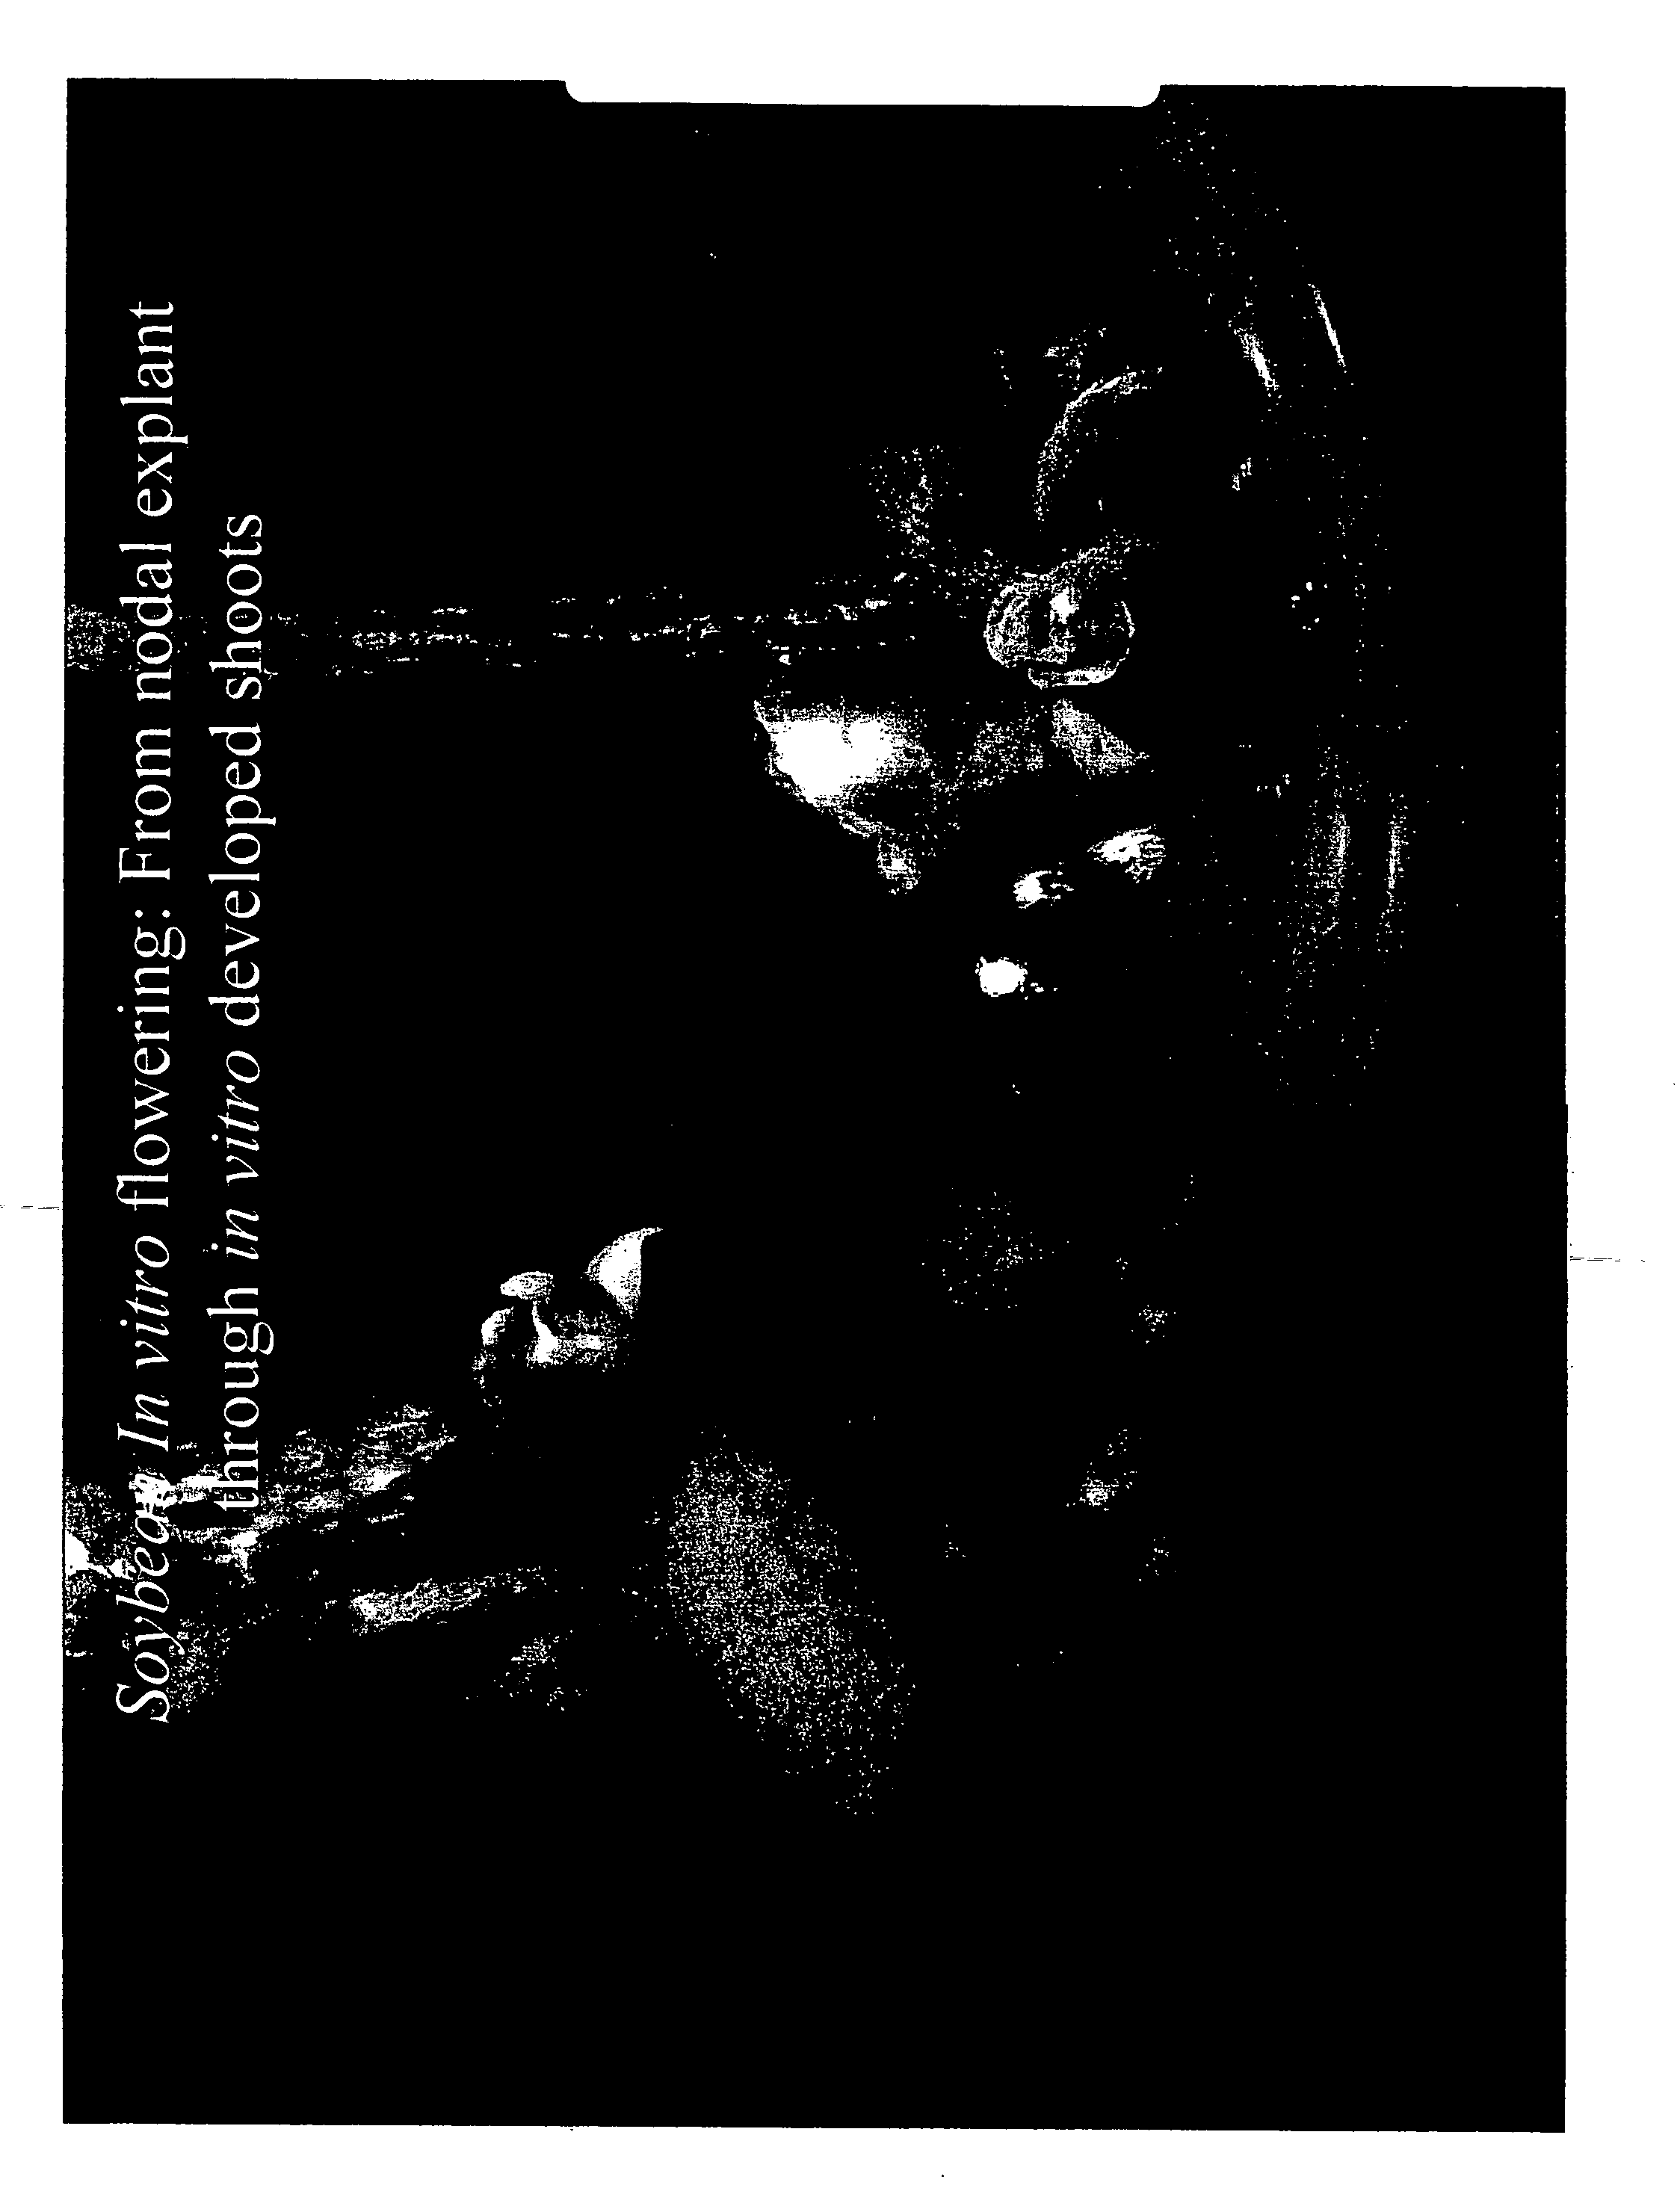 Method for producing direct in vitro flowering and viable seed from cotyledon, radicle, and leaf explants, and plants produced therefrom